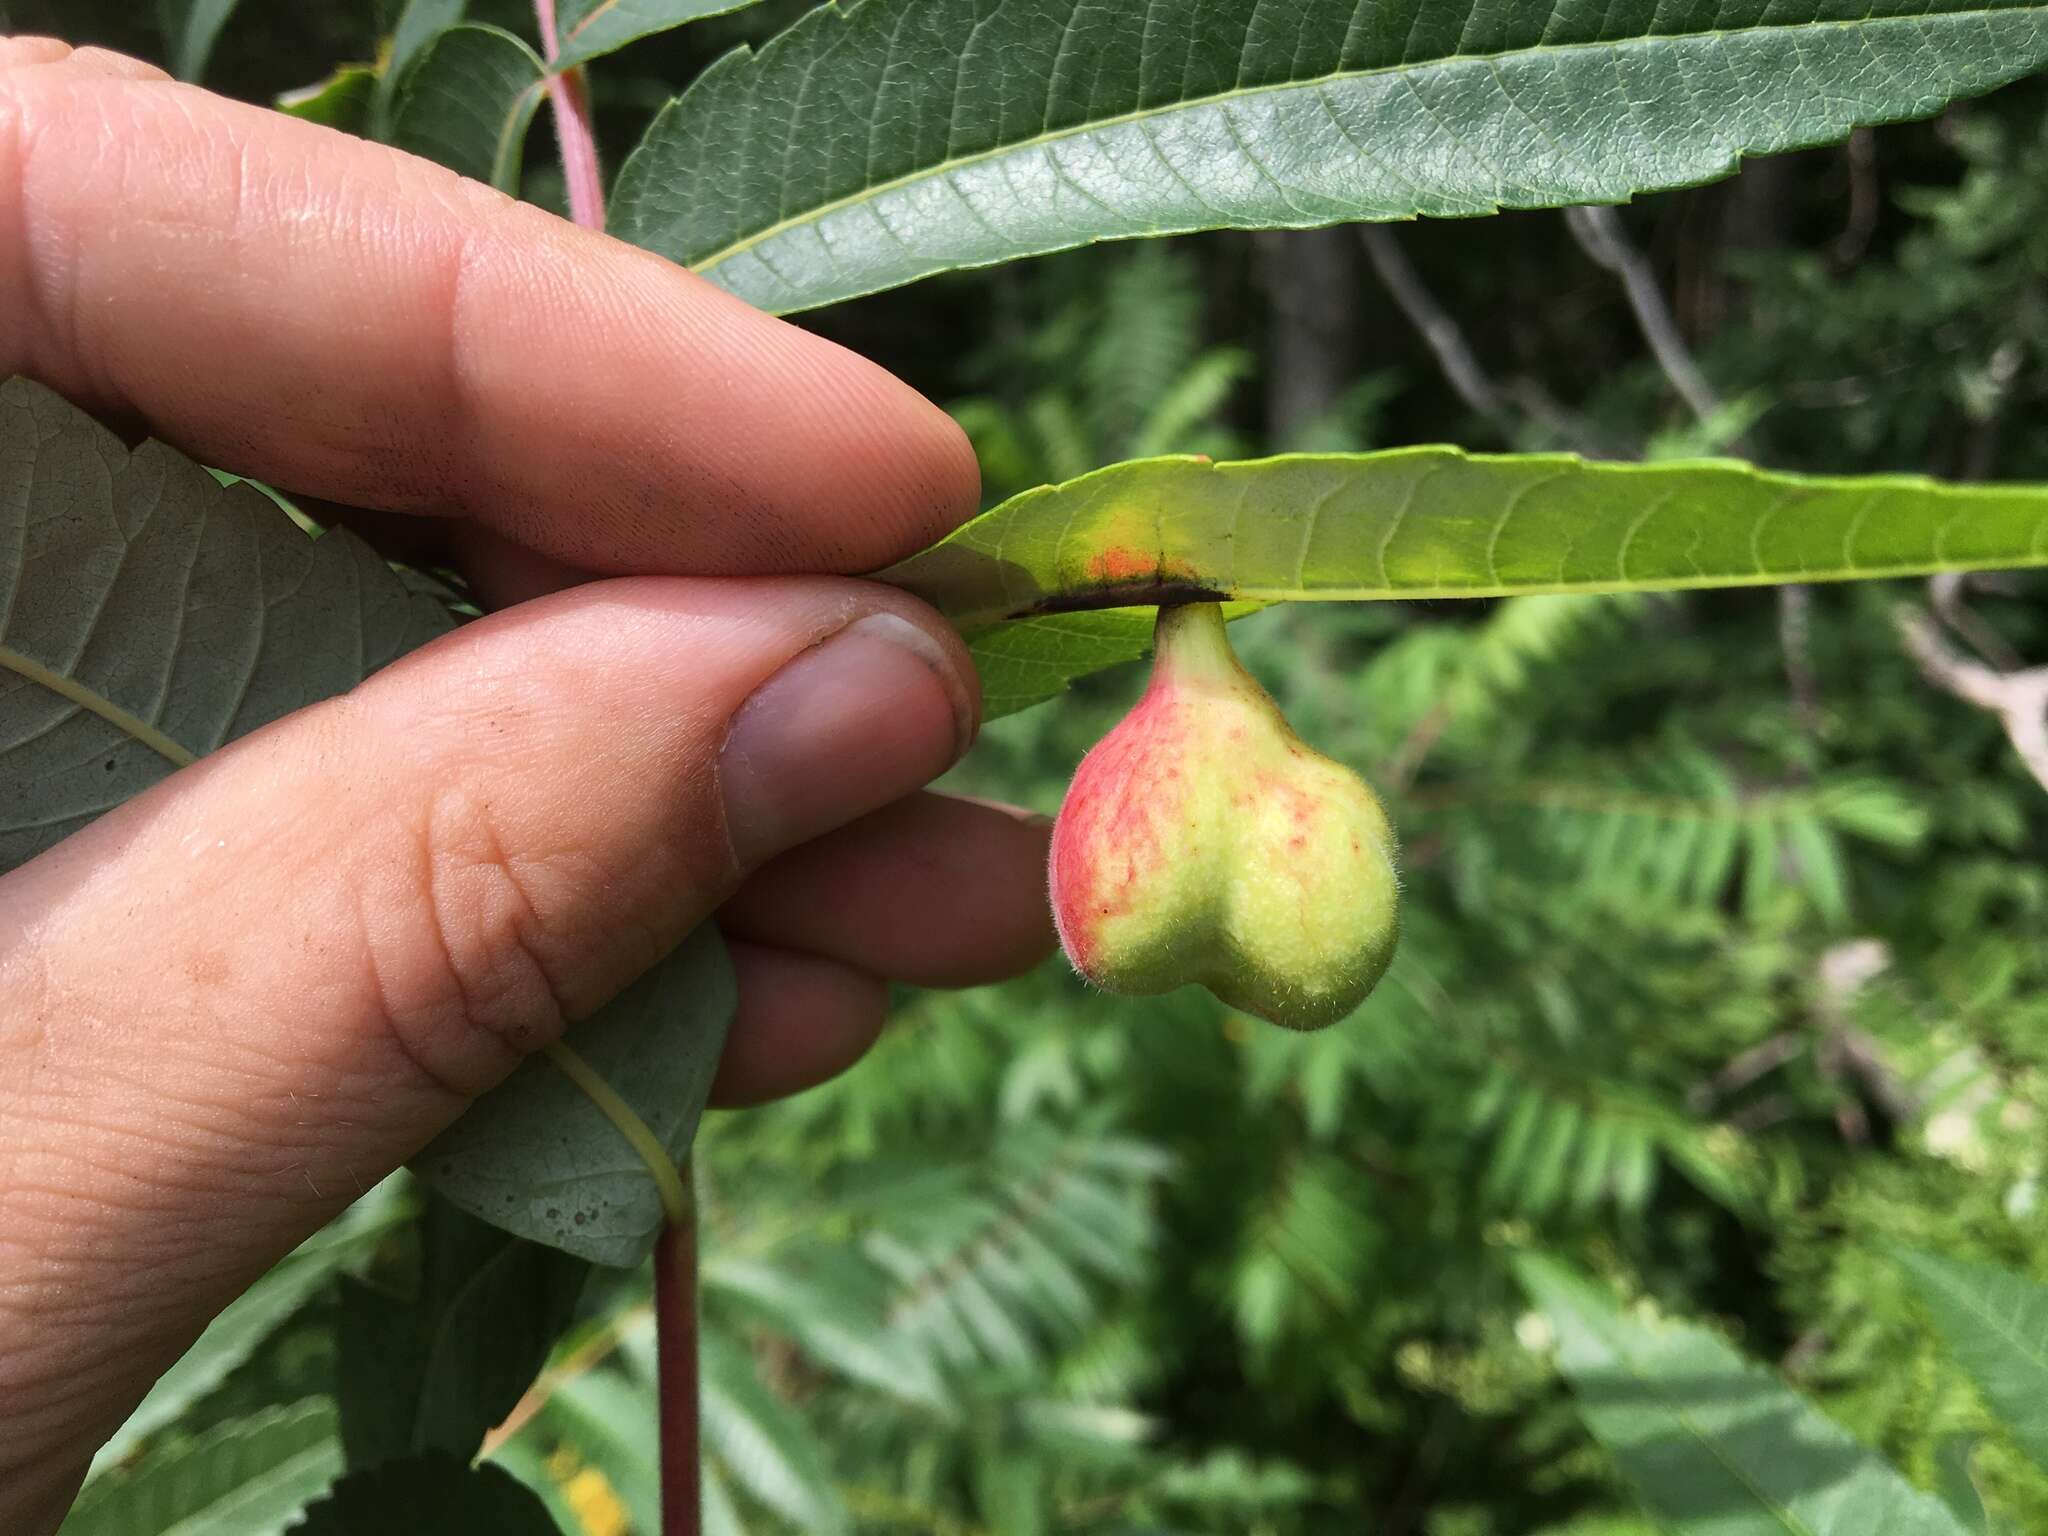 Image of Sumac Gall Aphid